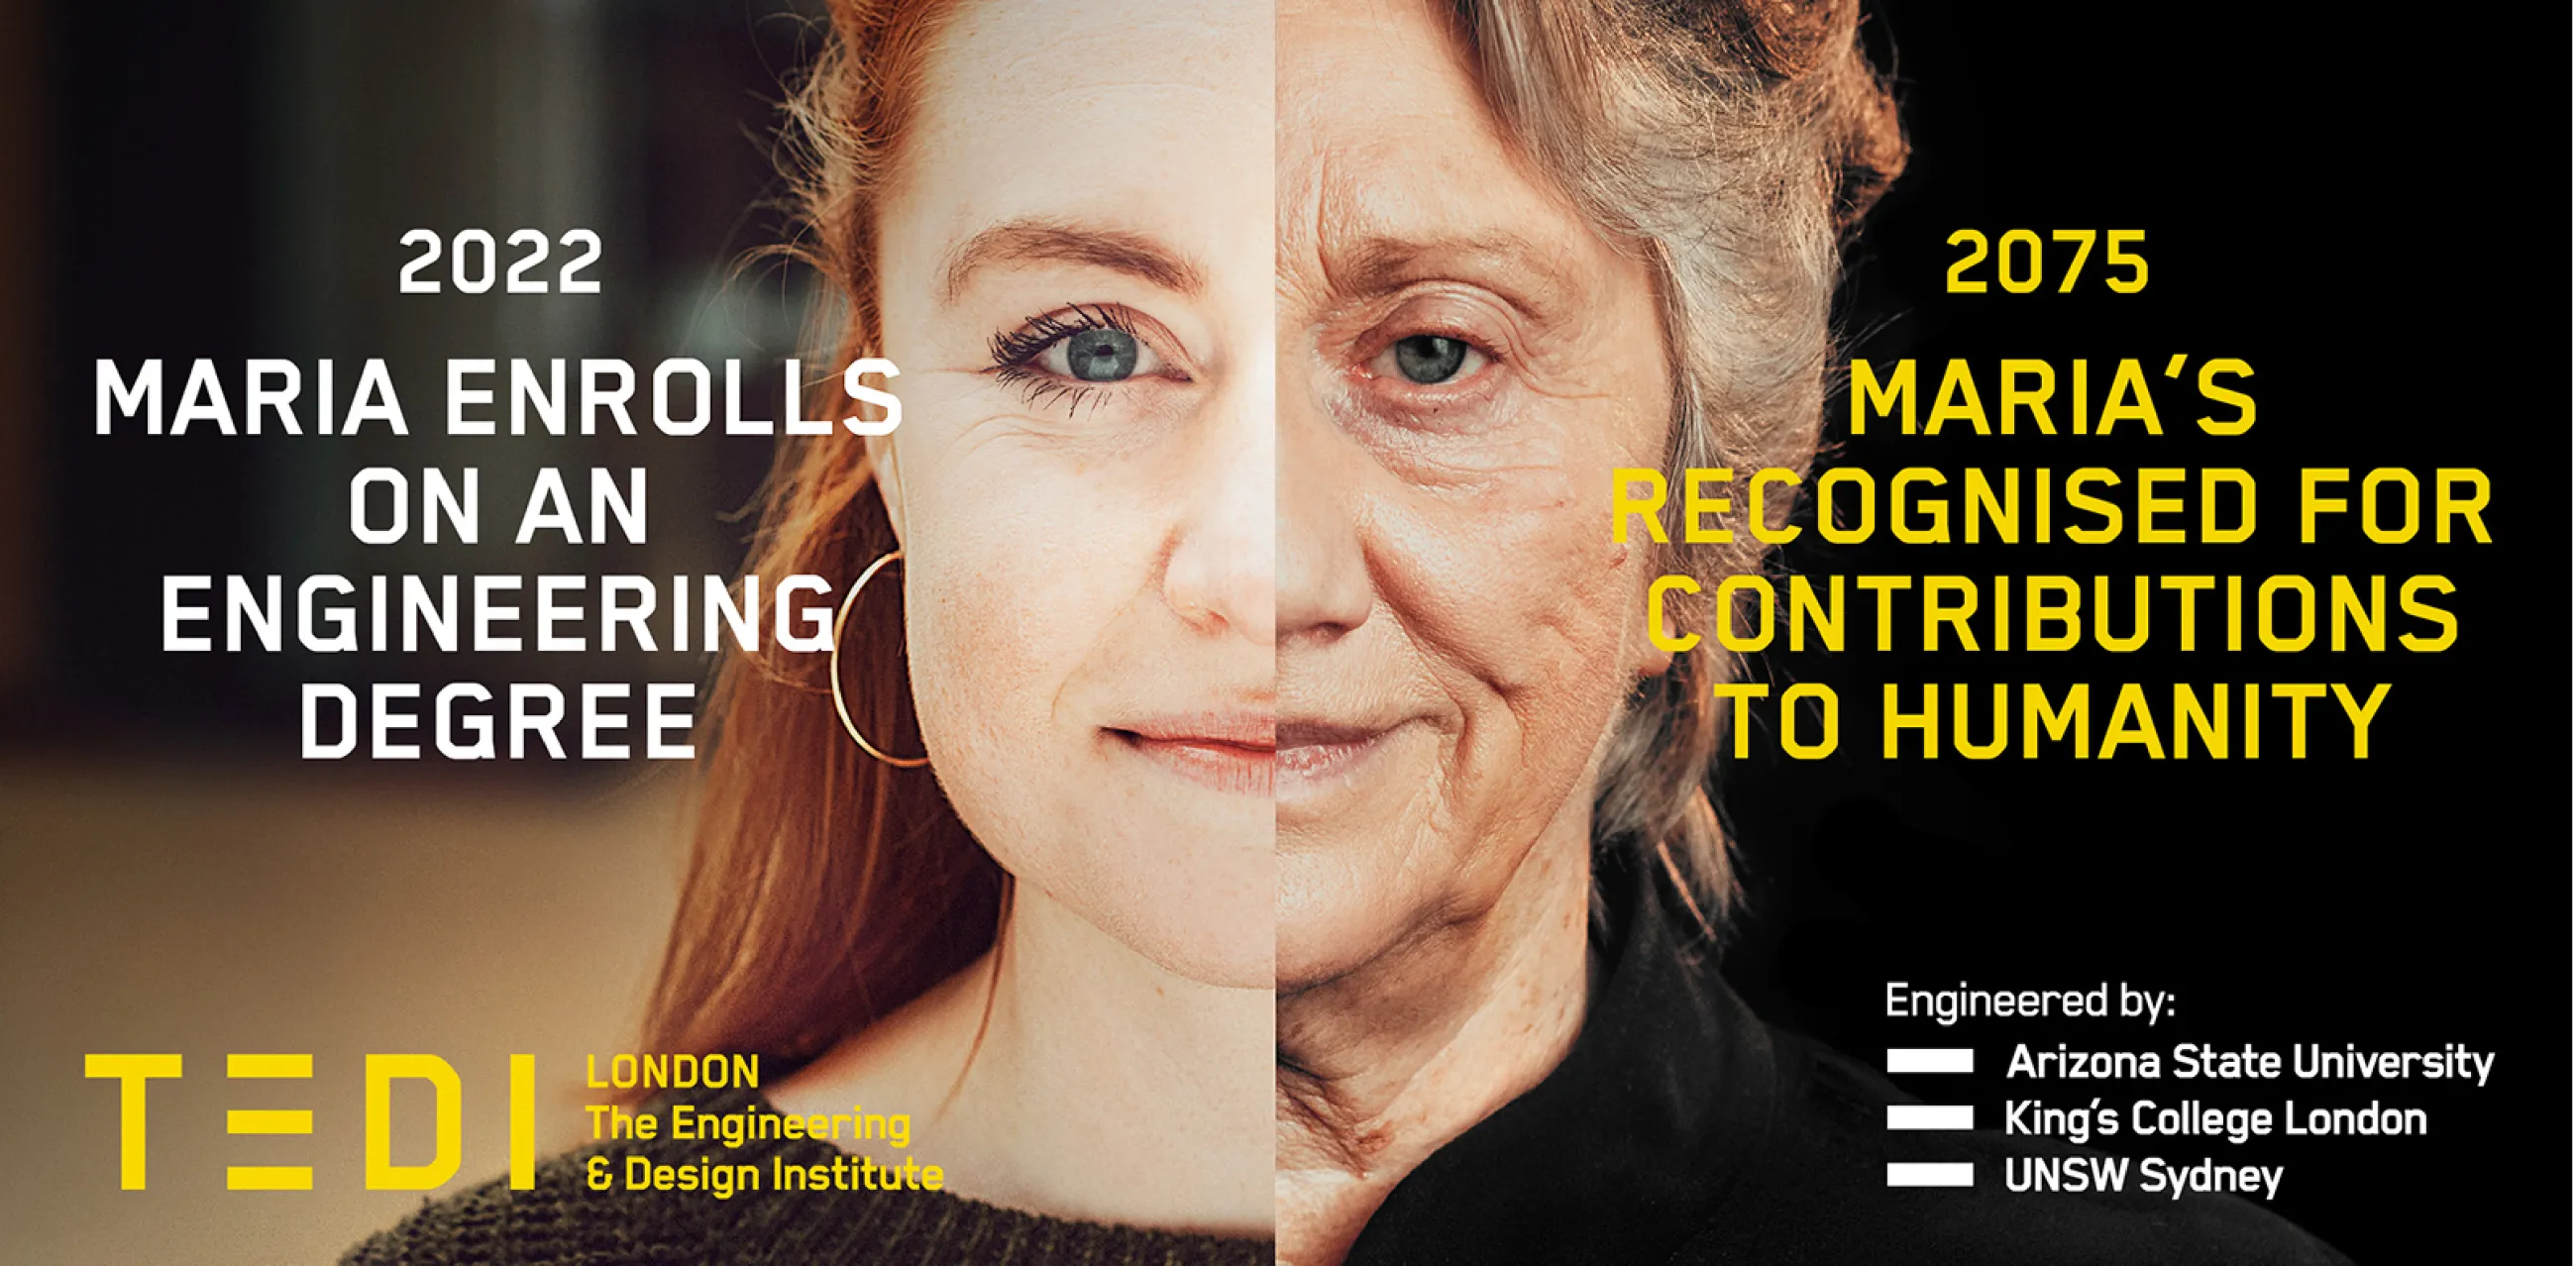 2022: Maria enrolls on an engineering degree. 2070: Maria's recognised for contributions to humanity. A two part portrait with the left half showing a young woman's face and on the right side of the face, an older woman representing how she might look 50 years in the future